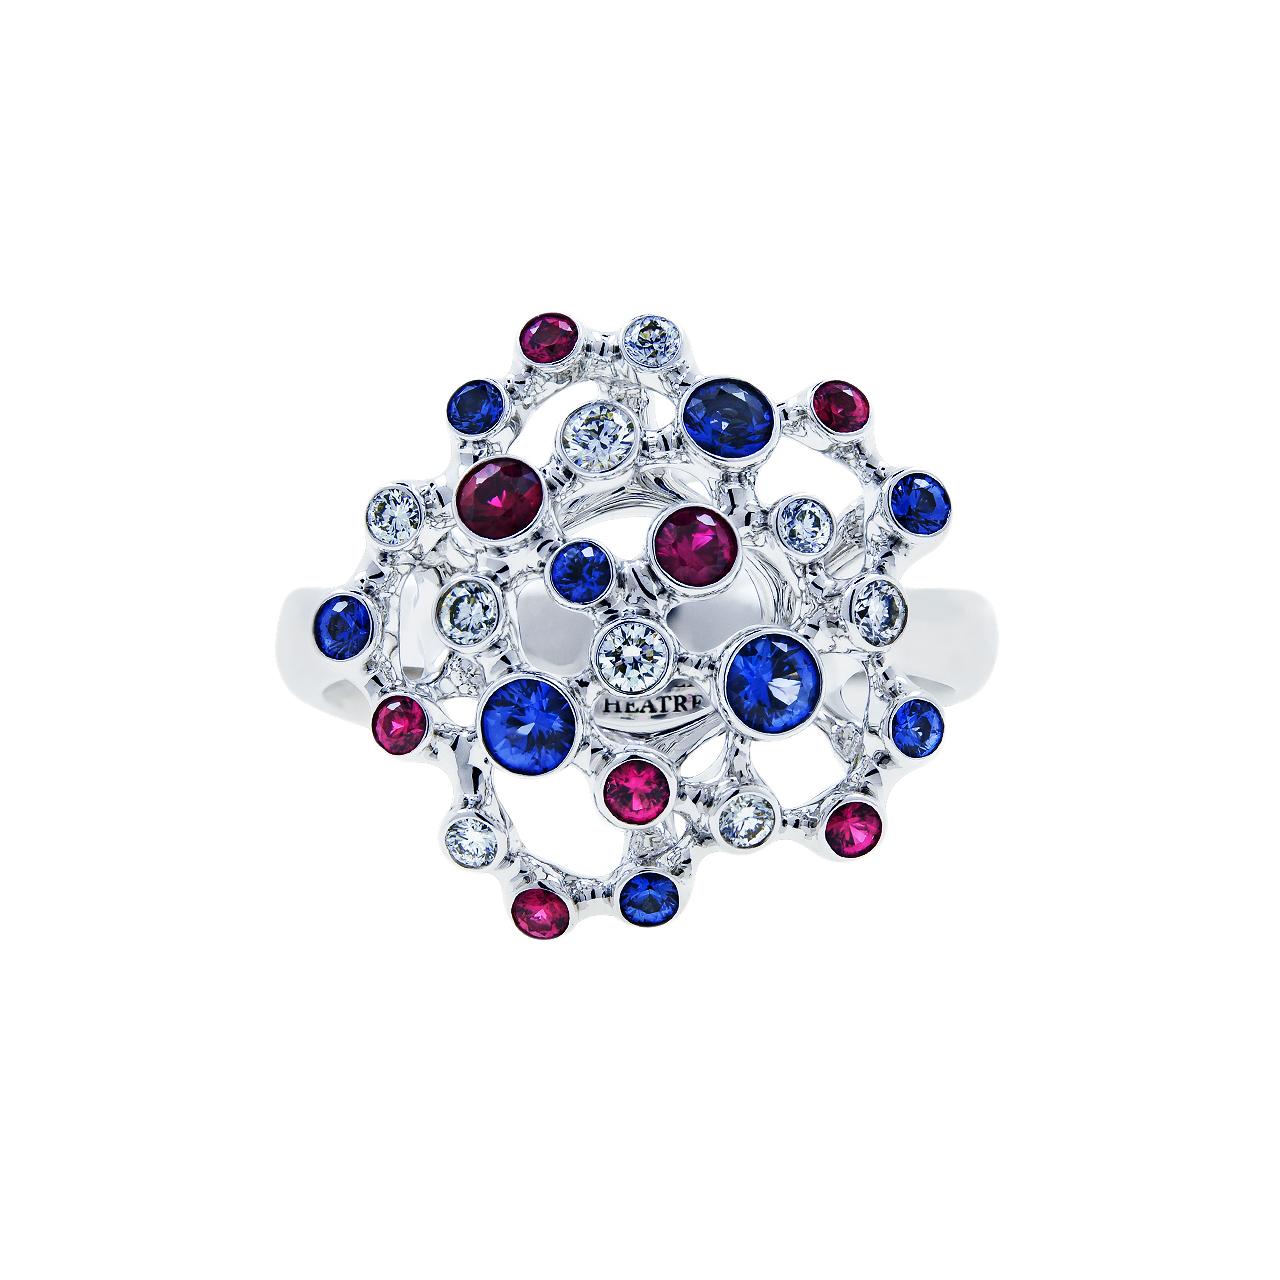 - 10 Round Diamonds - 0.15 ct, G/VVS
- 8 Round Rubies - 0.20 ct
- 9 Round Sapphires - 0.31 ct
- 18K White Gold 
- Weight: 8.06 g
- Size: 17.2 mm
This elegant ring from the Byzantium collection is encrusted with 0.15 ct of diamonds, 0.31 ct of